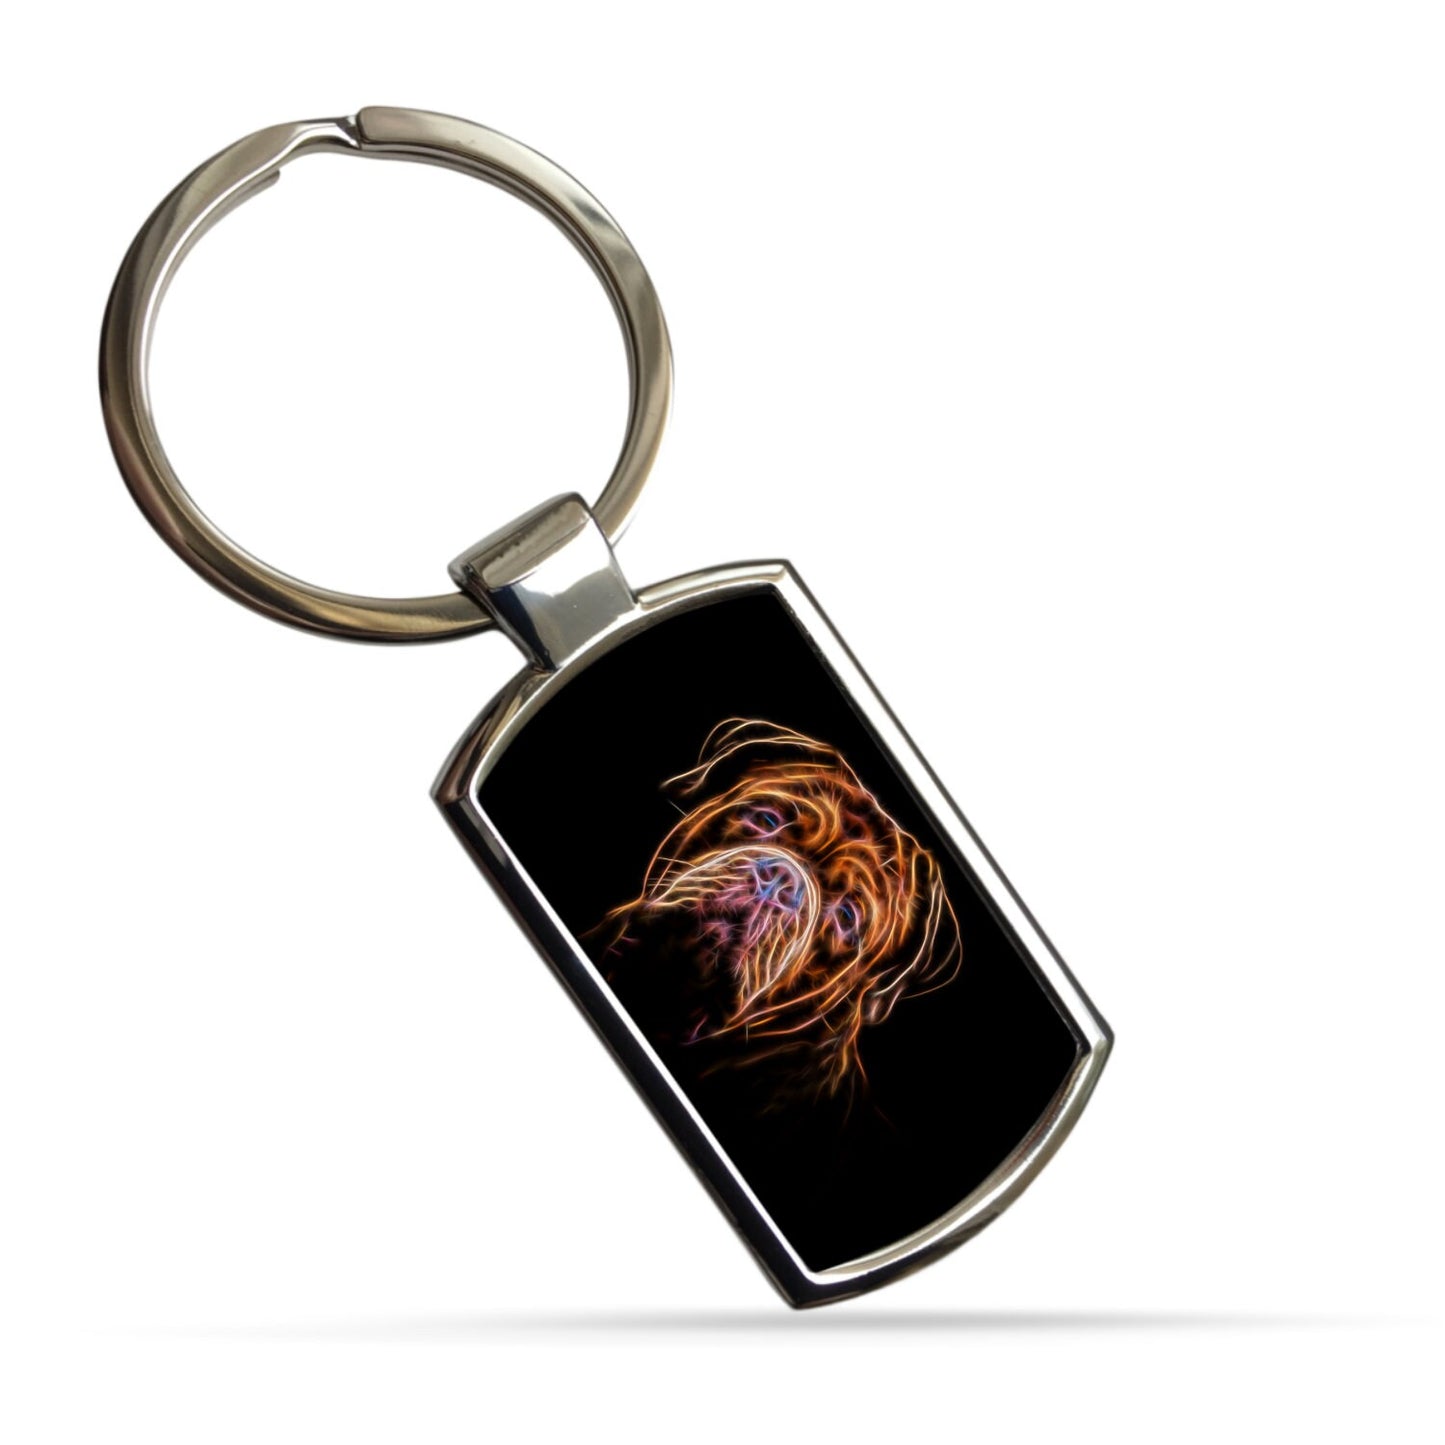 Dogue De Bordeaux Metal Wall Plaque with Stunning Fractal Art Design #3. Also available as Keychain or Coaster.